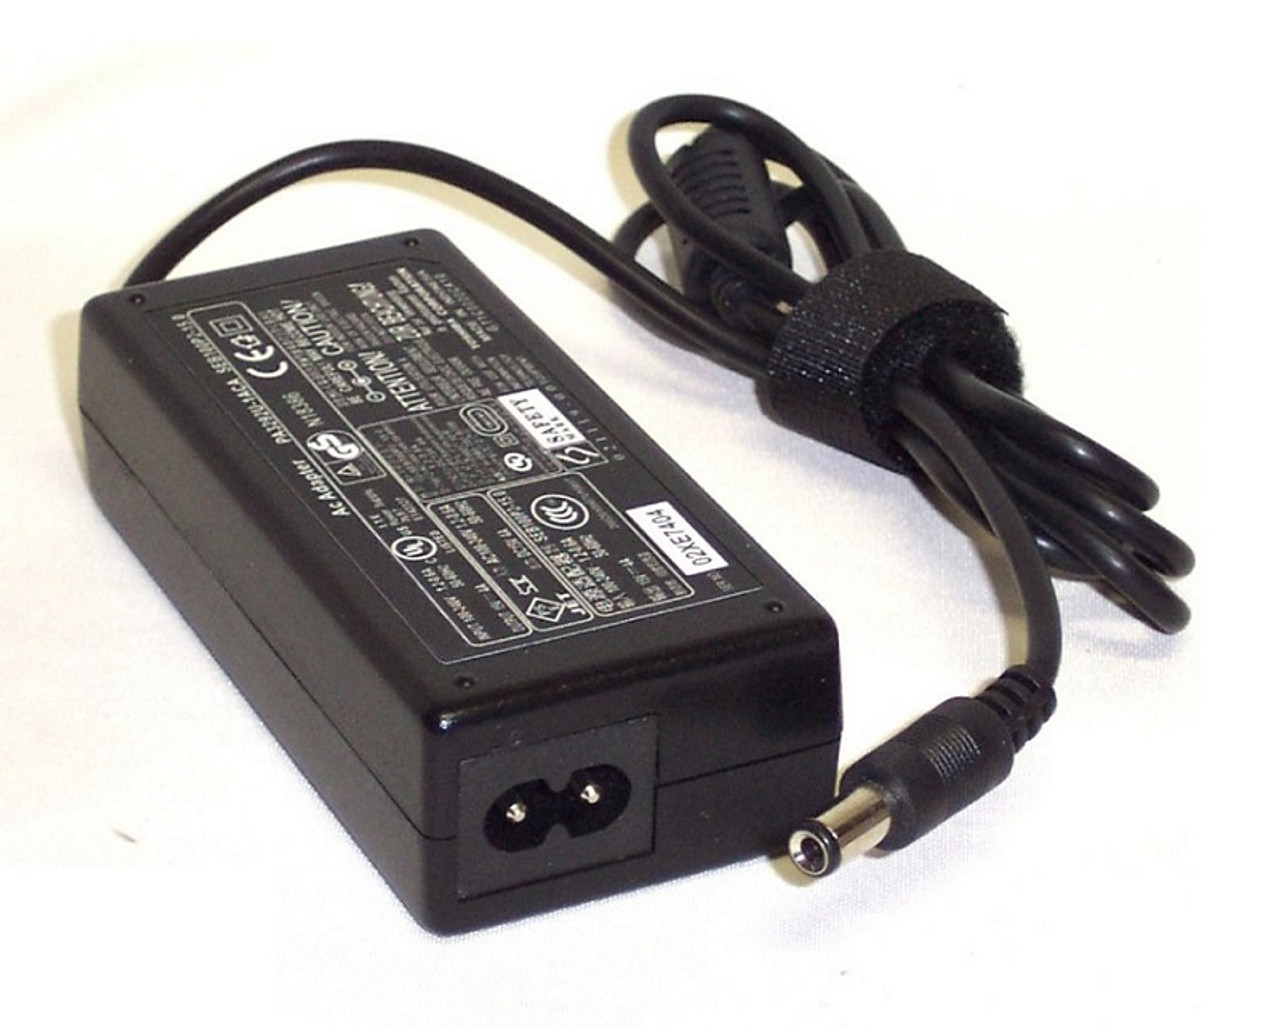 G6H47AA#ABA - HP 65-Watts AC Adapter for Smart Laptop